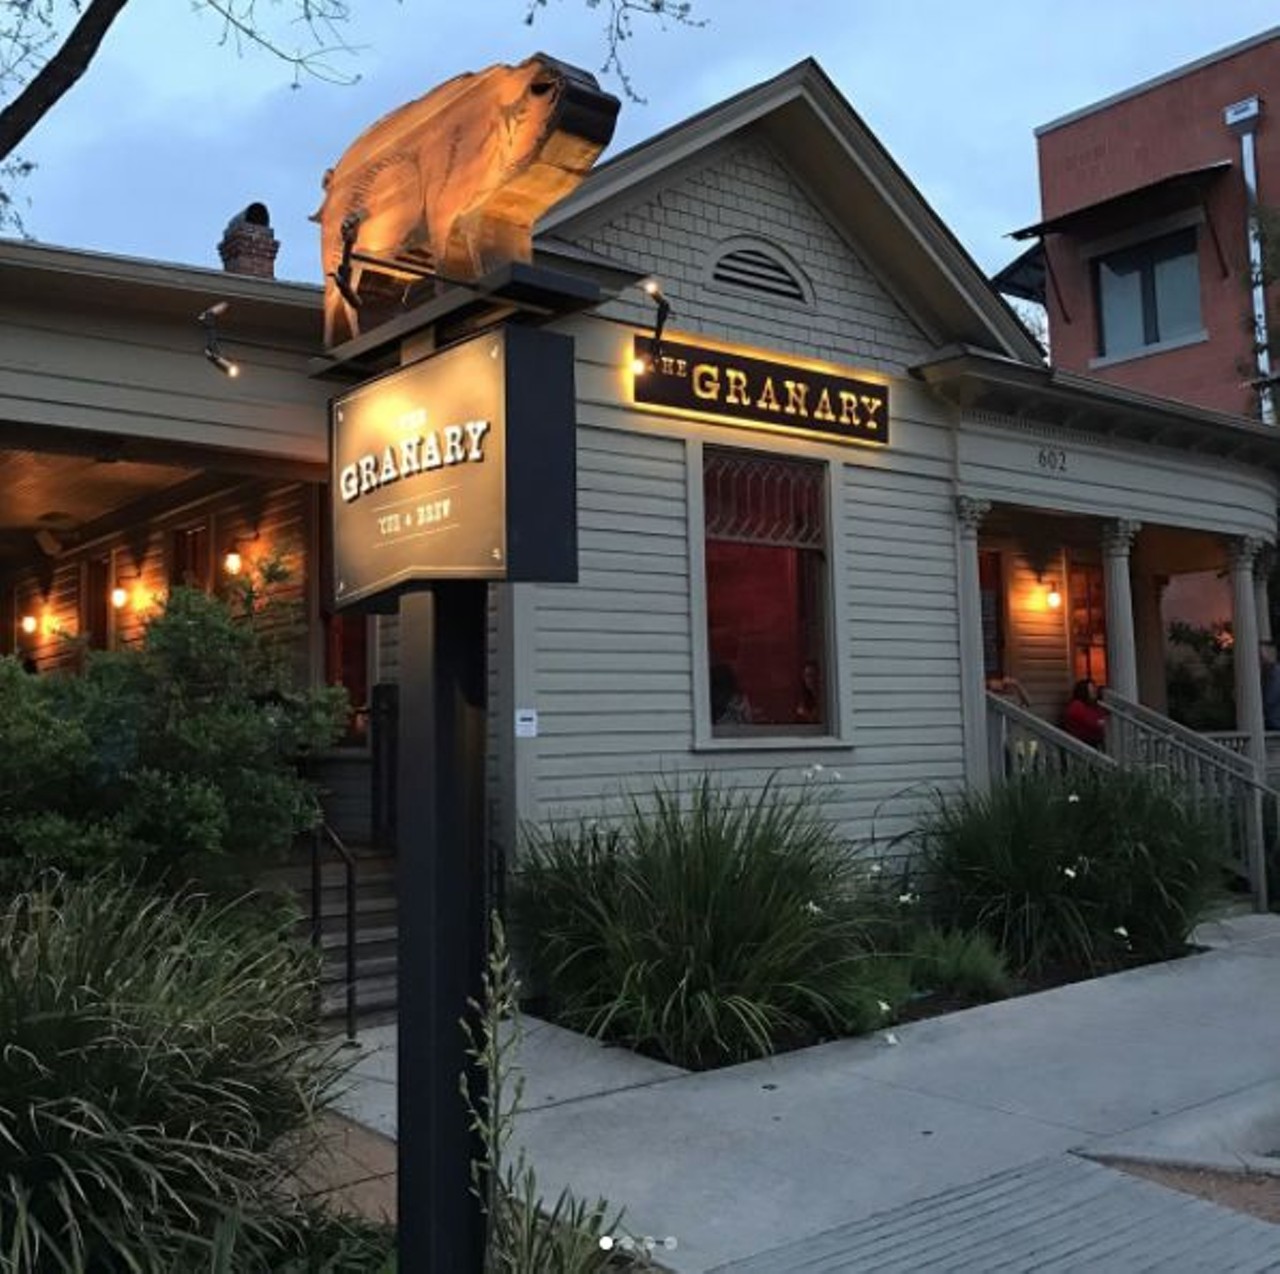 The Granary 'Cue & Brew ?
602 Avenue A, (210) 228-0124
The restaurant and brewery is one of the best spots in town to grab some 'cure and is certainly a must-visit for anyone new to San Antonio.
Photo via Instagram, dogandafrog